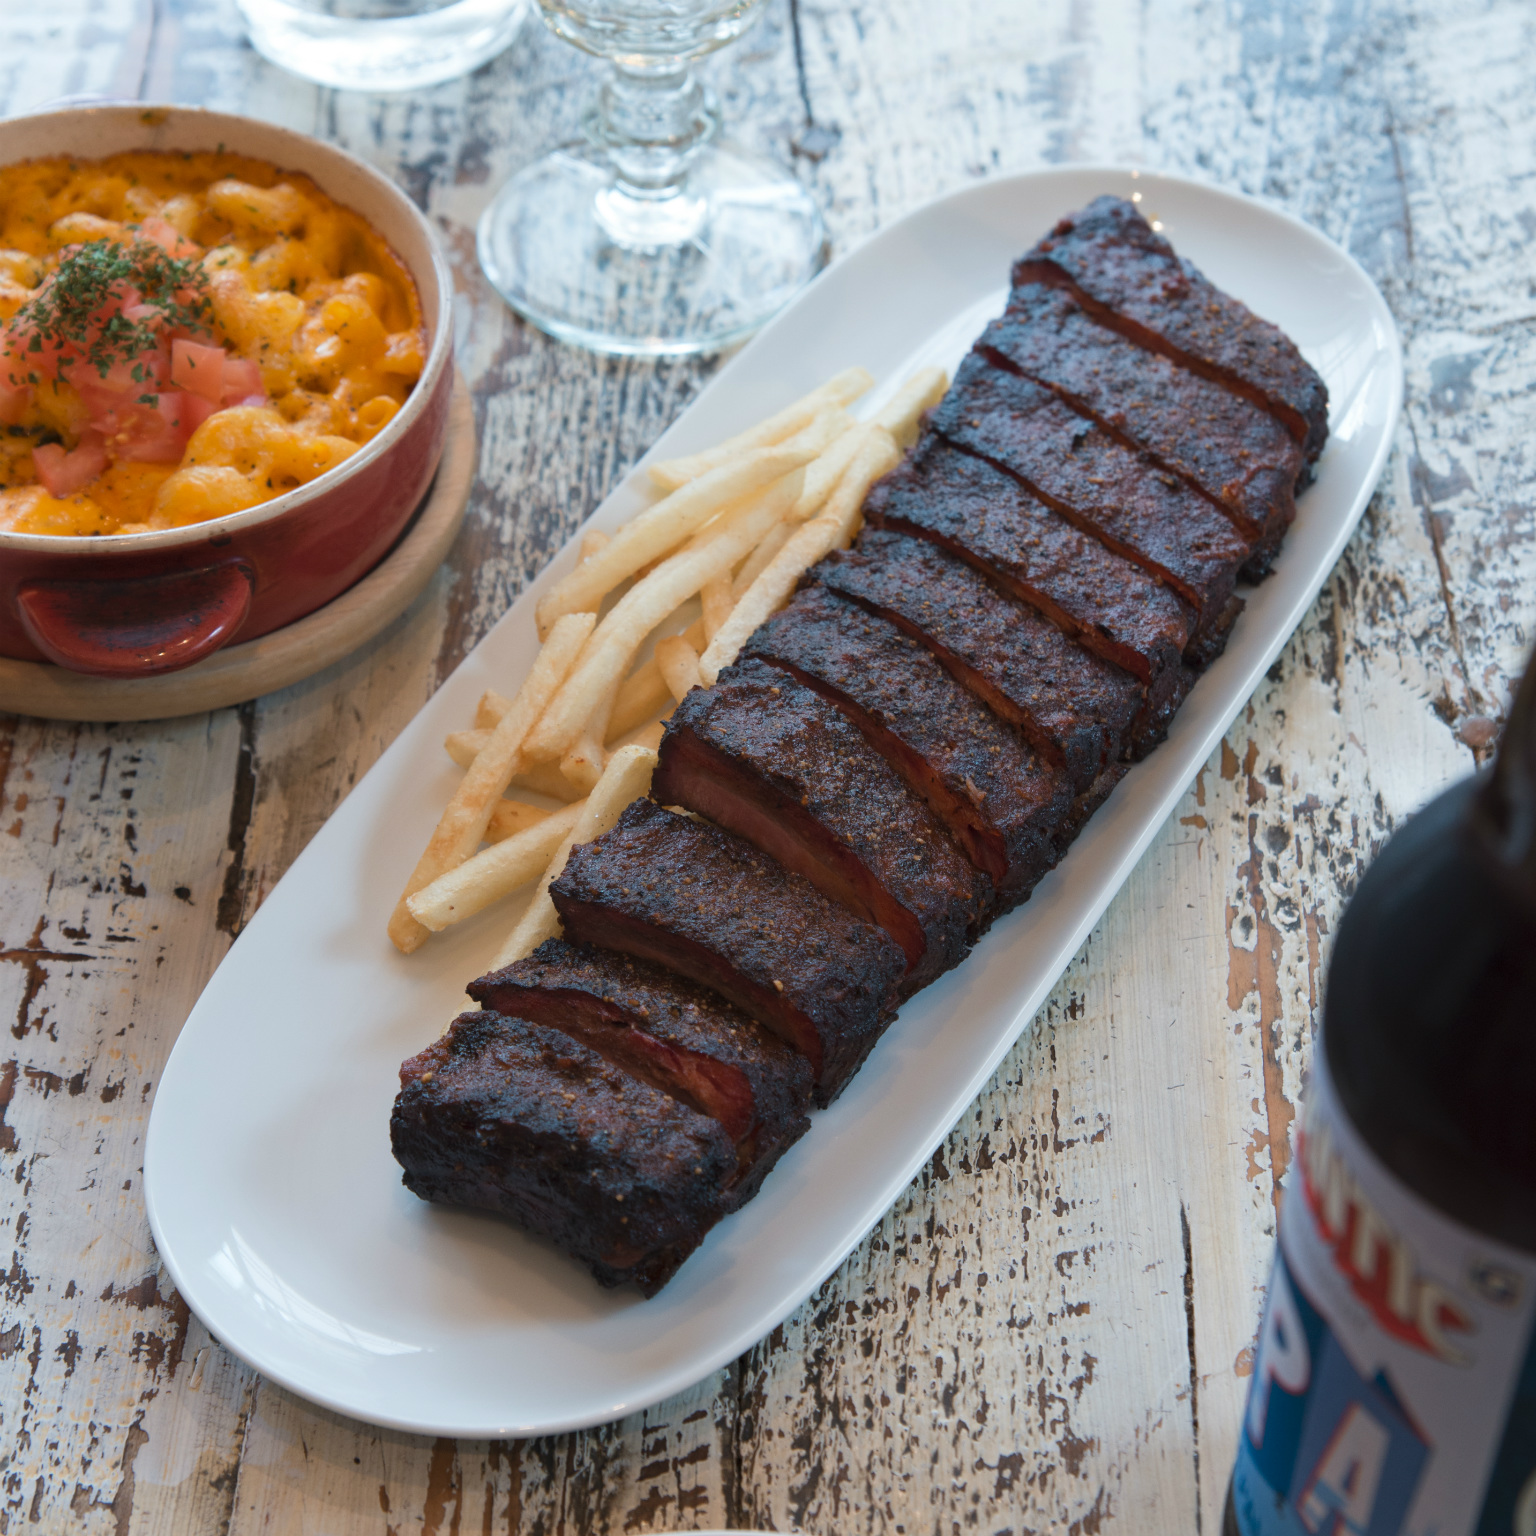 Ribs, brisket and craft beer at an accidental chef’s laid-back barbecue